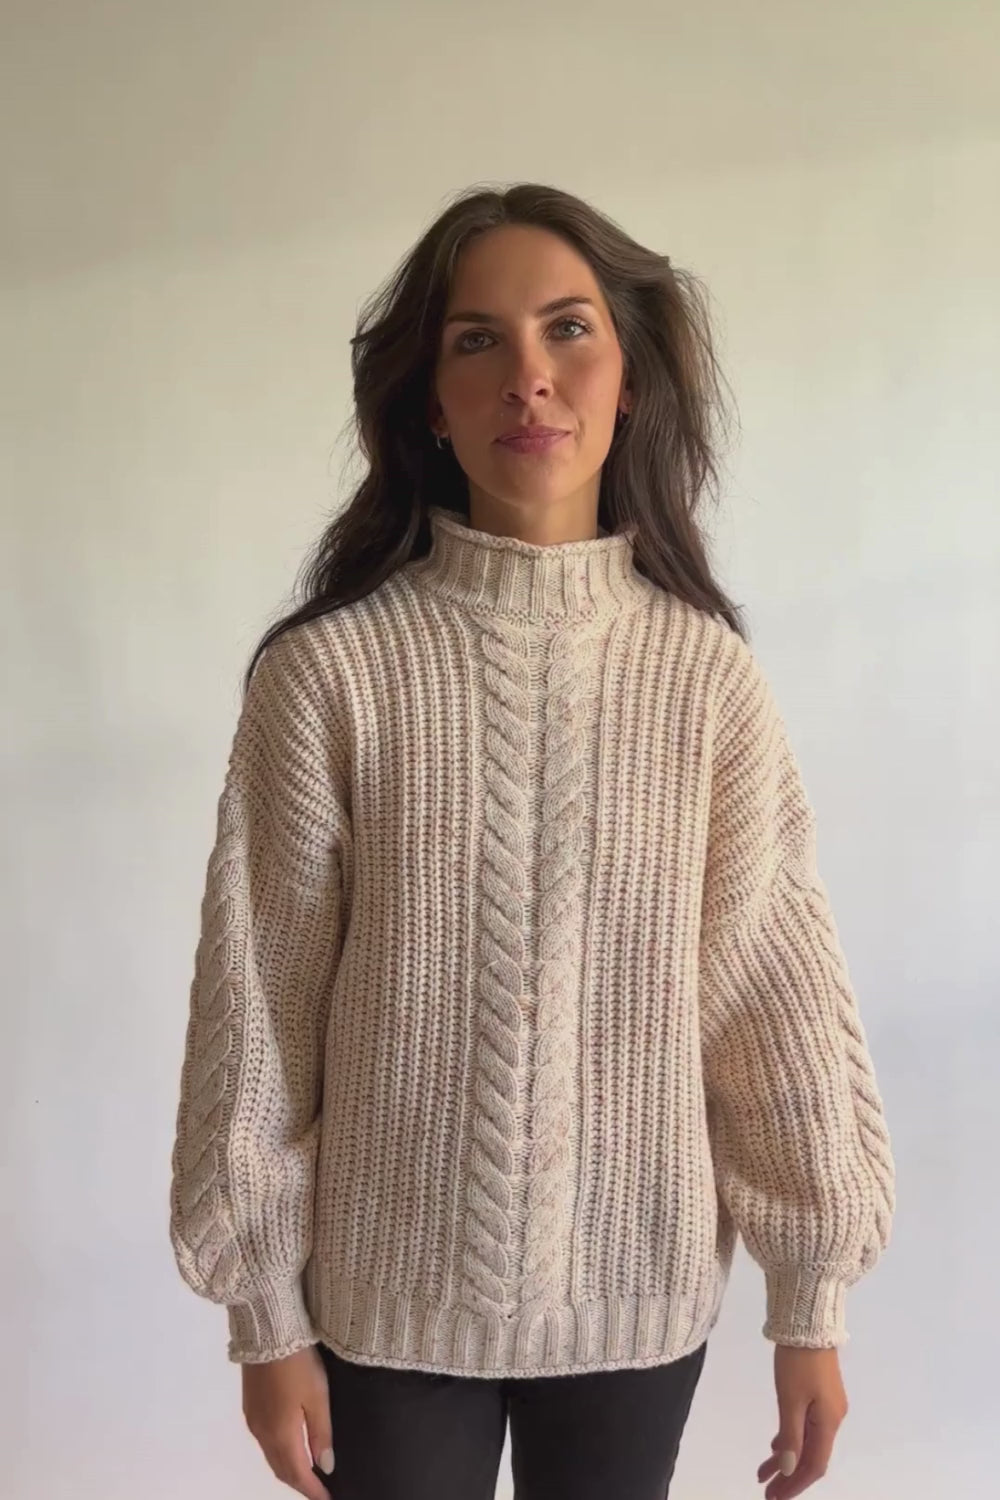 Sweater Treguaco Orgánico Beige Mujer